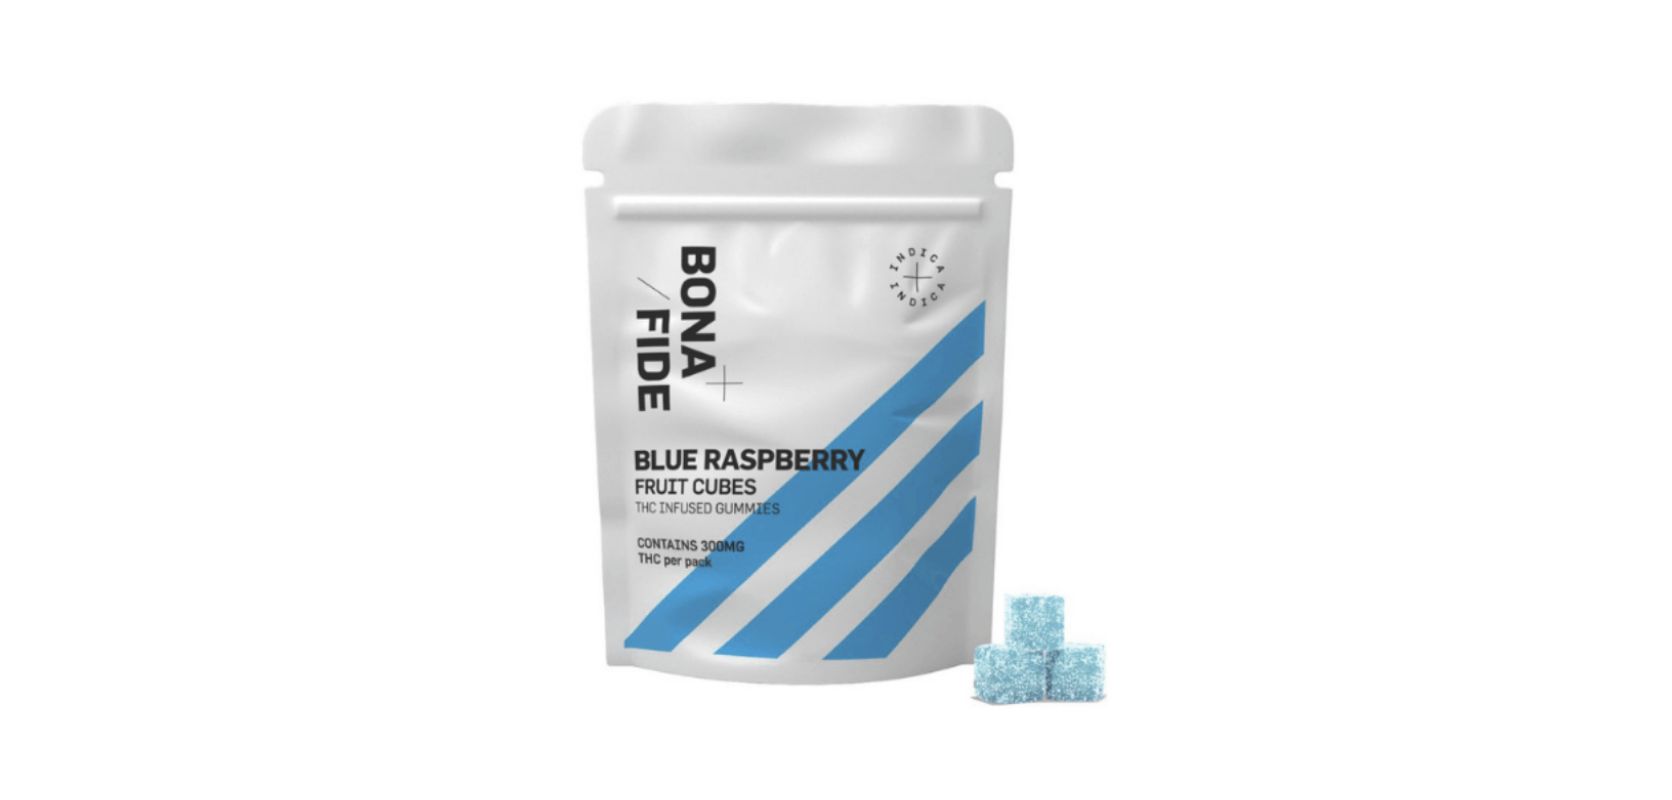 Are you looking for a delicious and potent way to relax and unwind after a long day? Look no further than Bonafide's Blue Raspberry Fruit Cubes! 